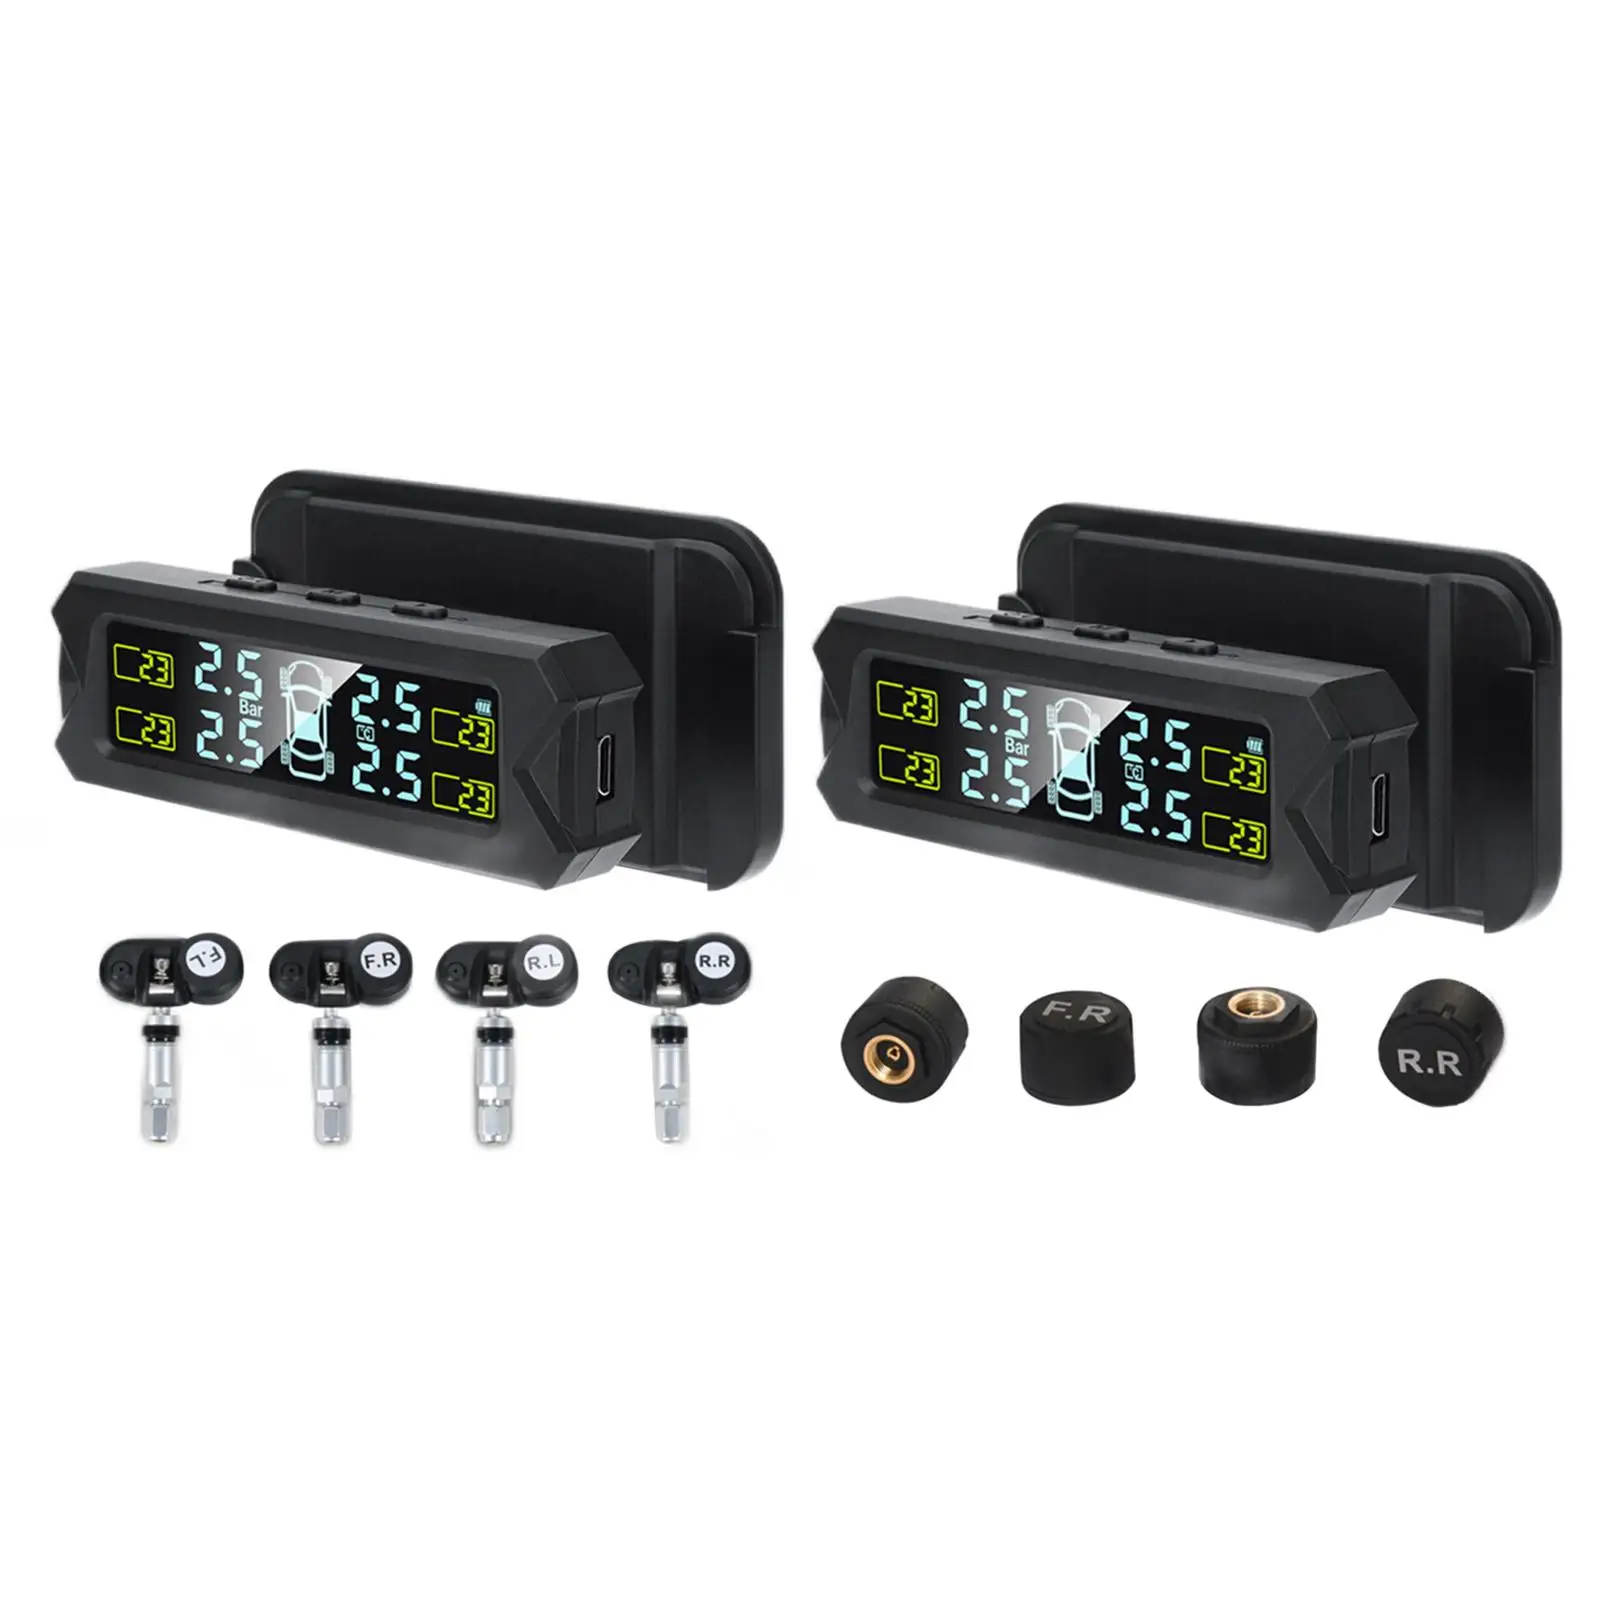 Automobile Car Solar Tmps Sensors Professional with Temperature and Pressure LCD